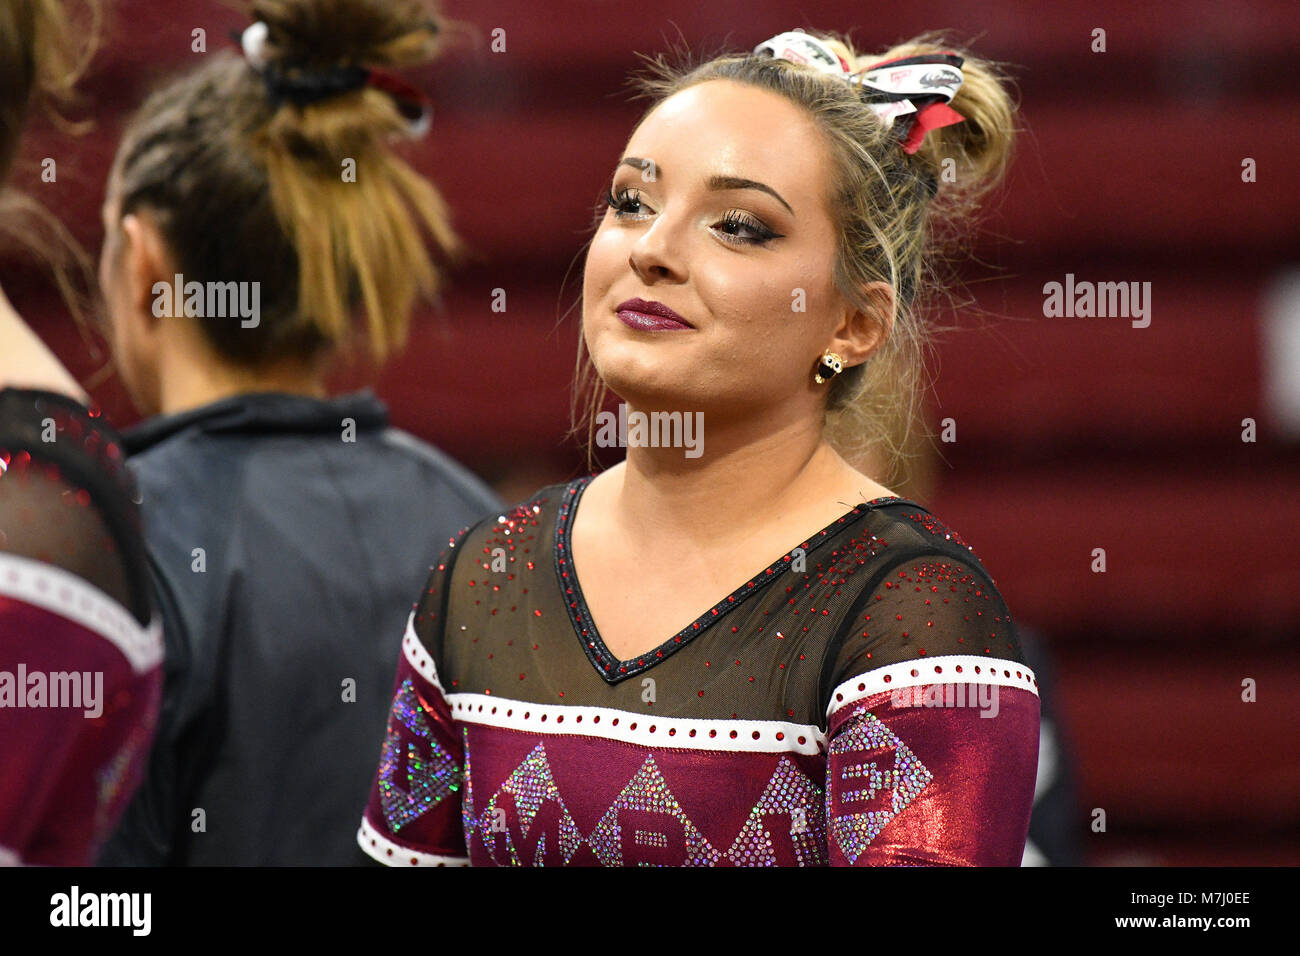 March 9, 2017 - Philadelphia, Pennsylvania, U.S - Temple Owls gymnast KERRA MASELLA watches teammates prep for the balance beam during a meet held in Philadelphia, PA. Temple finished second to Maryland in the tri-meet. (Credit Image: © Ken Inness via ZUMA Wire) Stock Photo